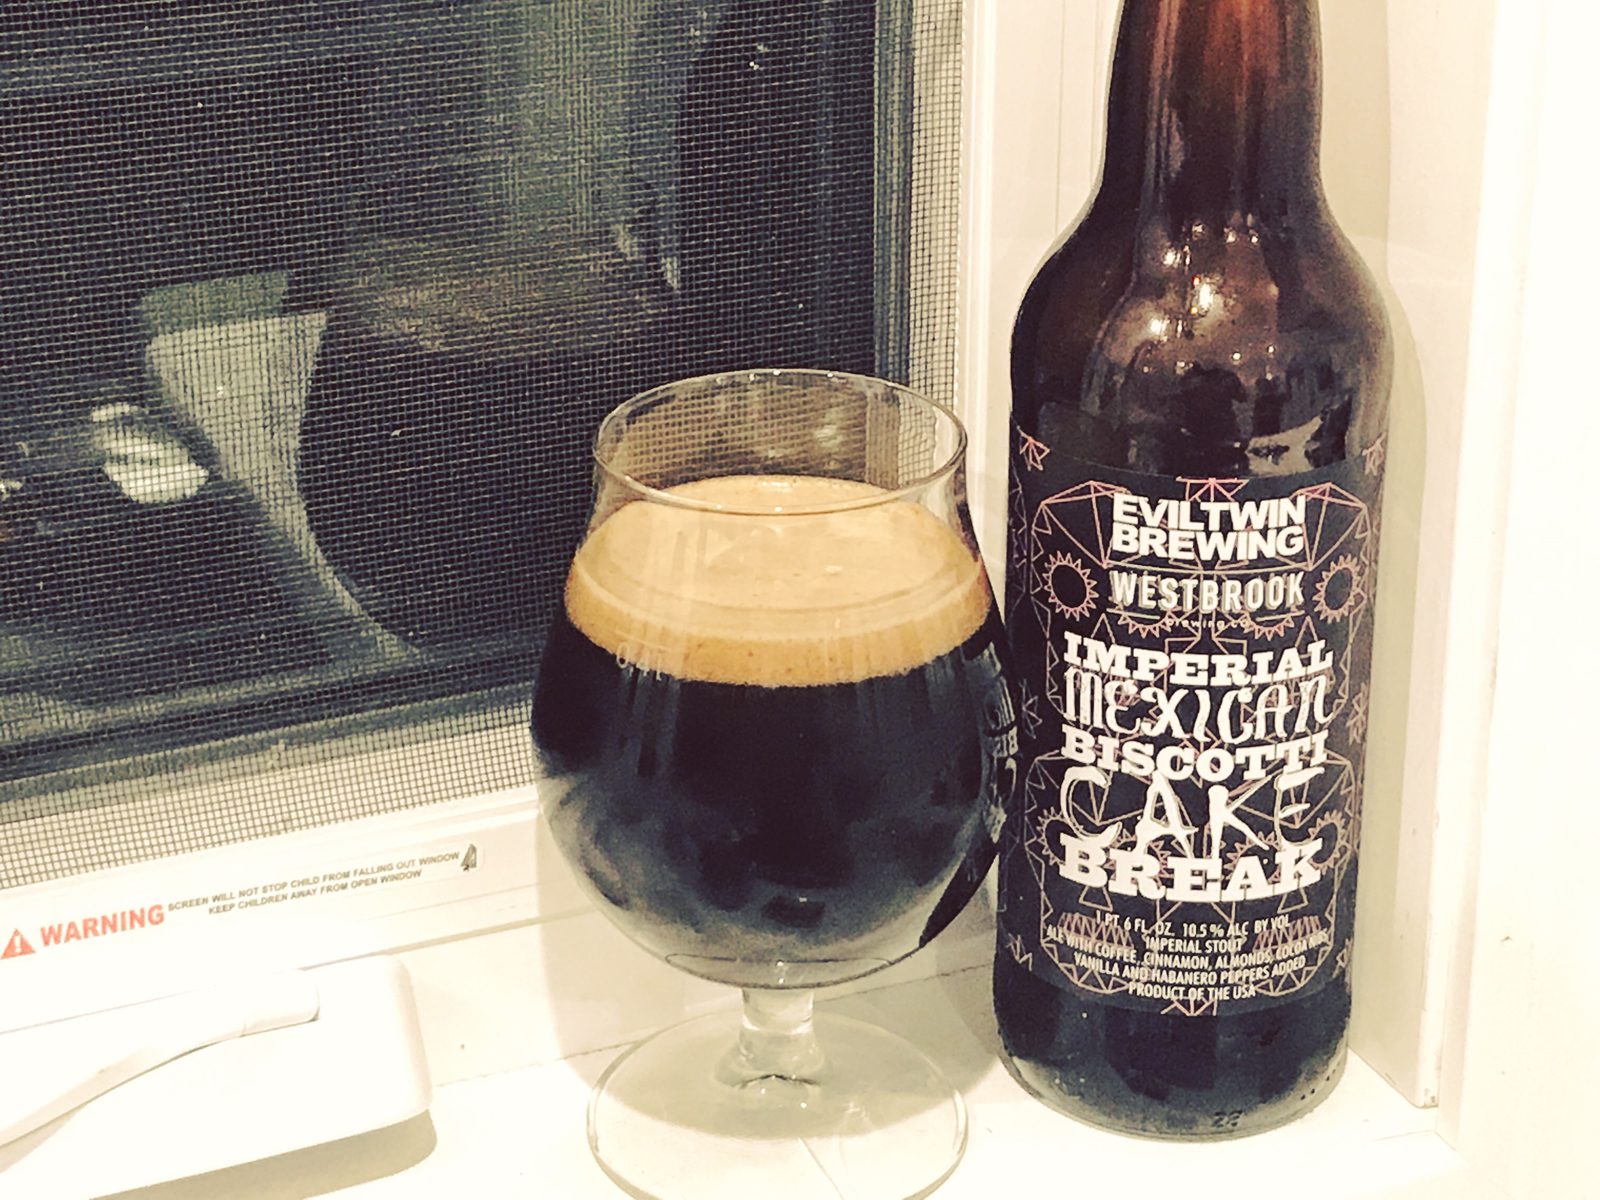 Evil Twin Brewing and Westbrook Brewing Company: Imperial Mexican Biscotti Cake Break